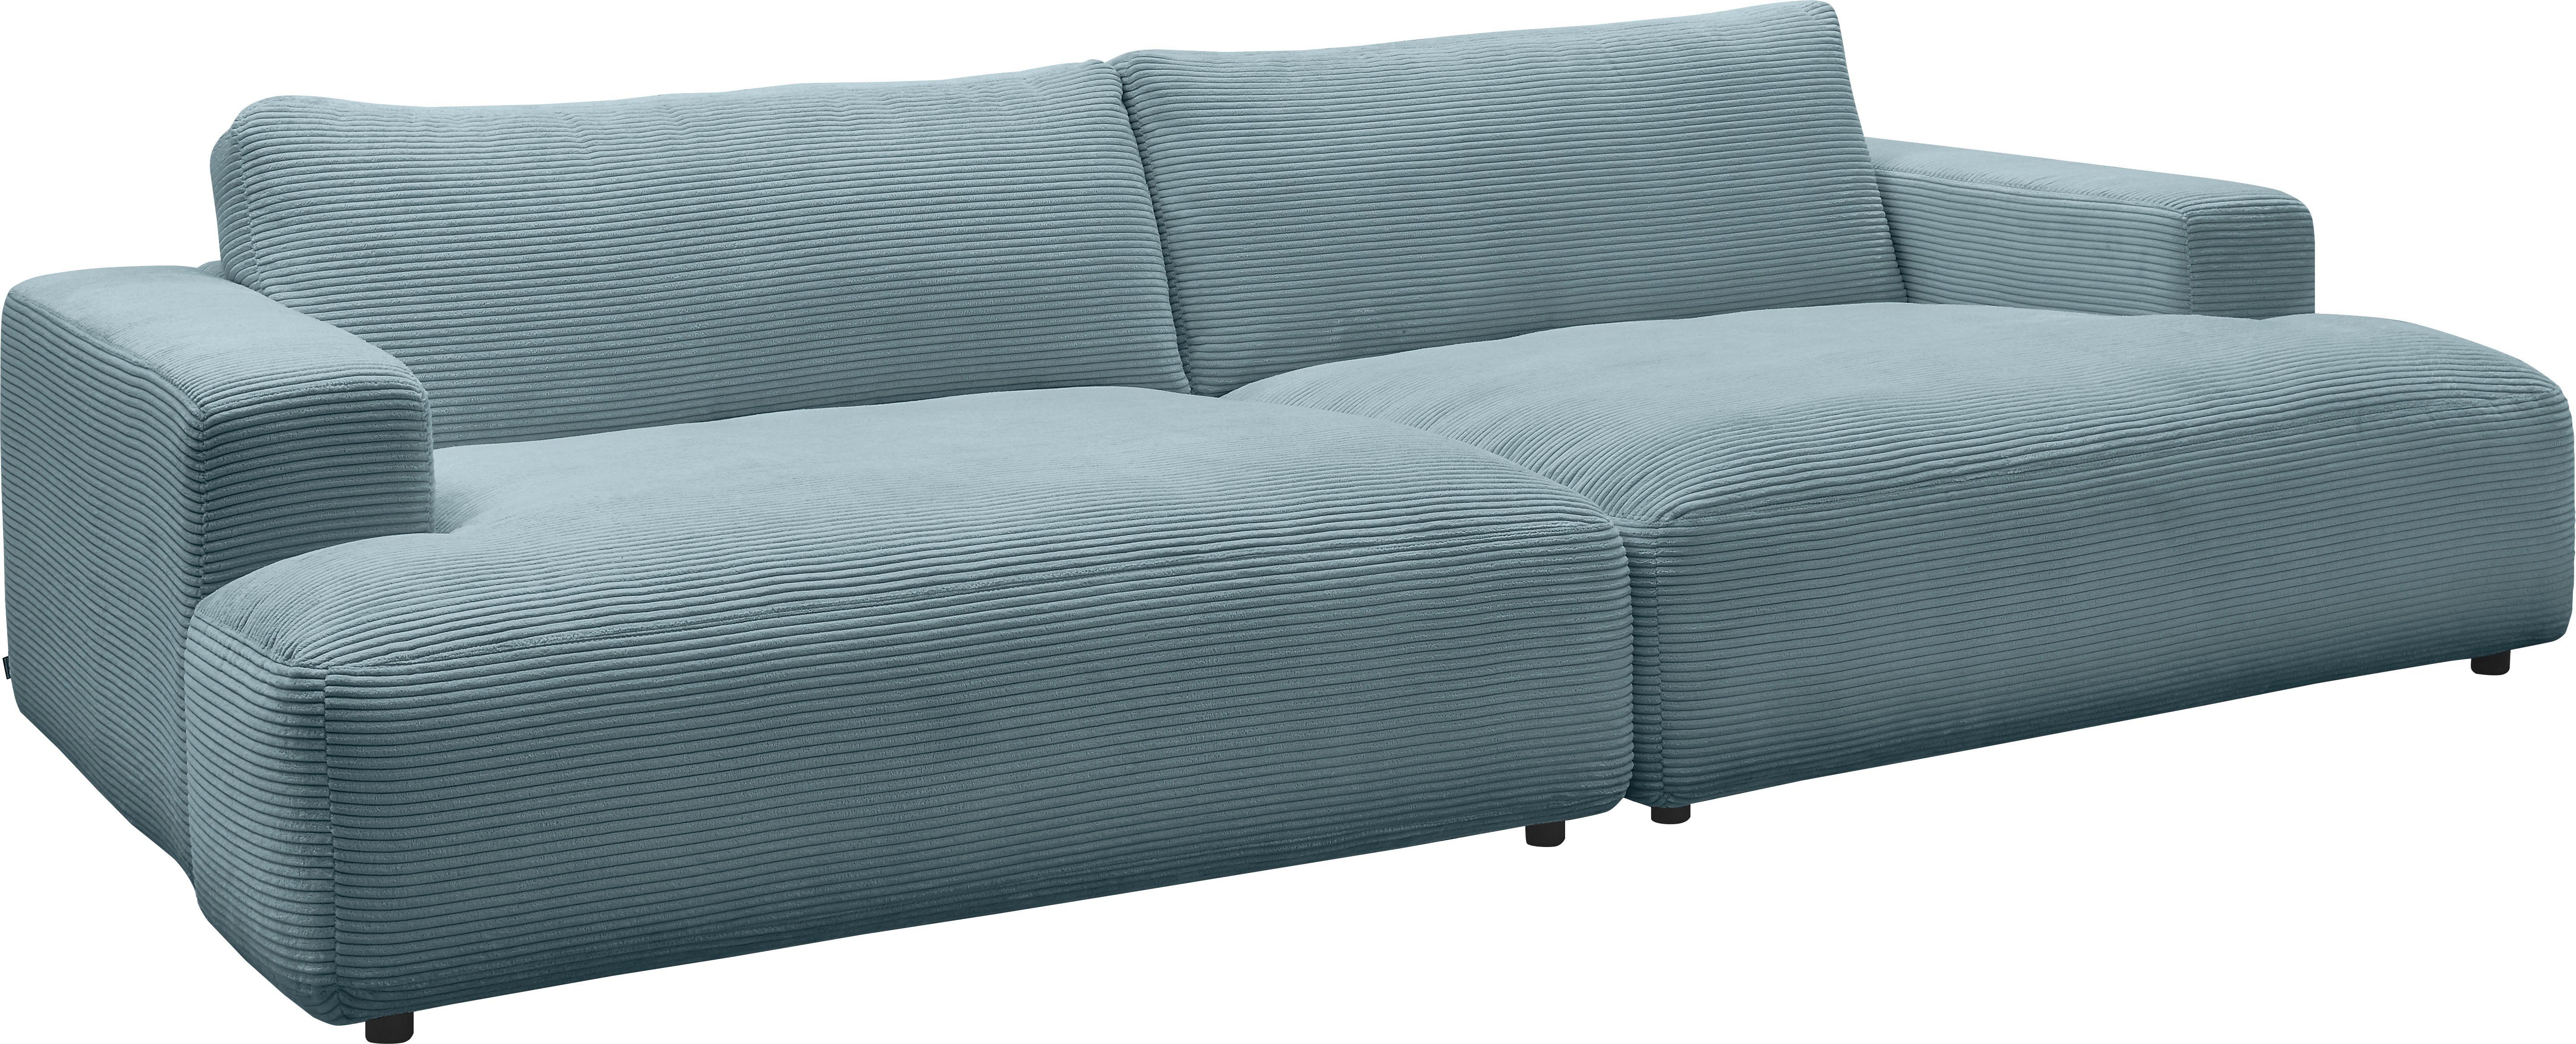 Loungesofa Breite Cord-Bezug, Musterring petrol 292 cm GALLERY by M Lucia, branded